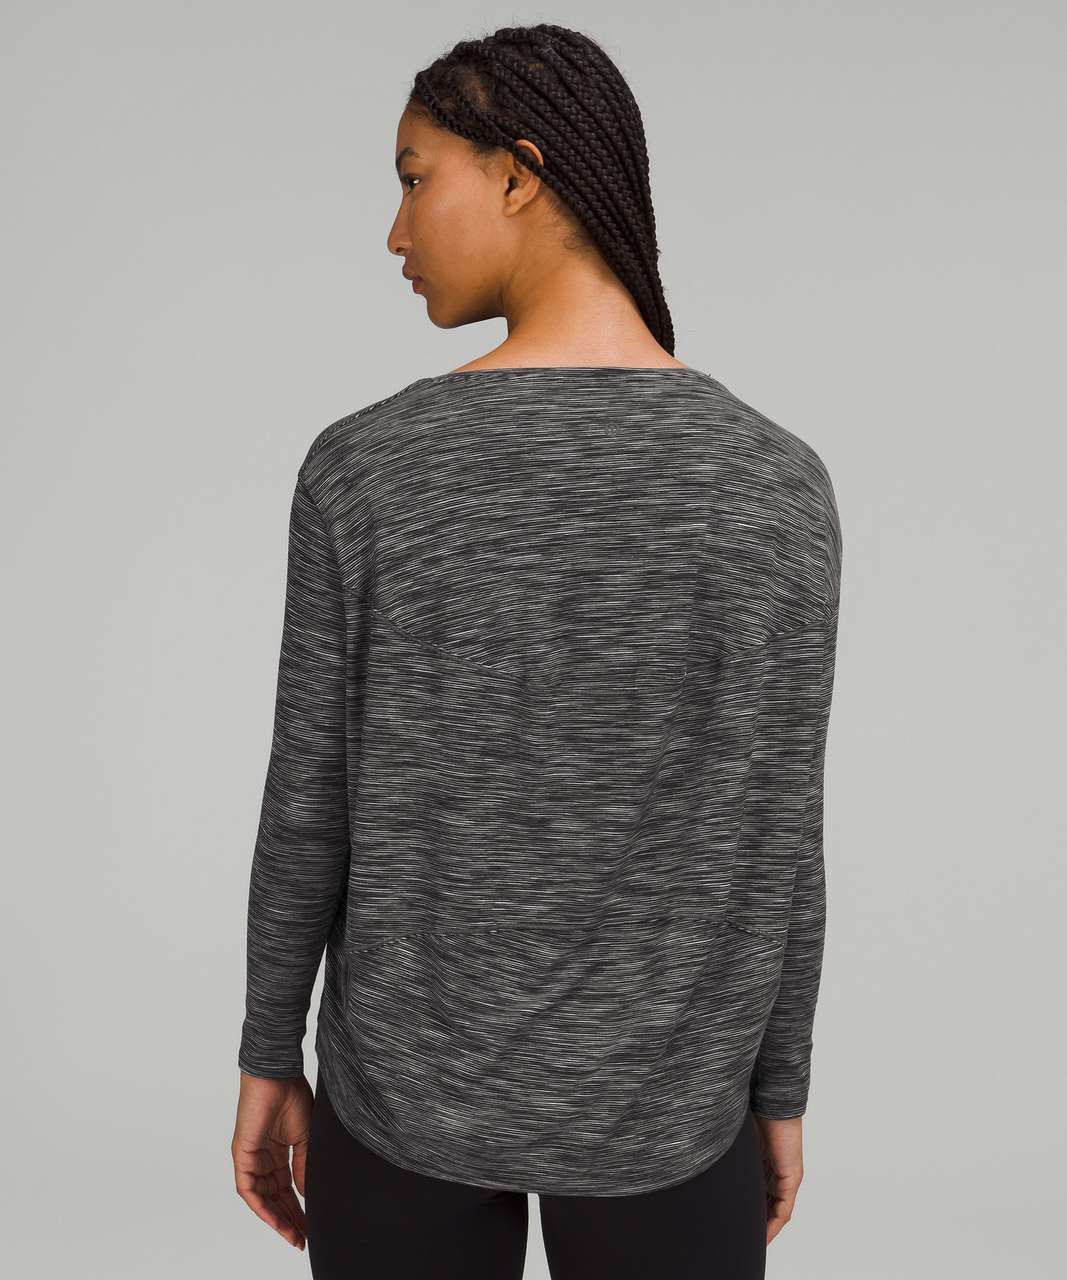 Lululemon Back in Action Long Sleeve Shirt *Nulu - Wee Are From Space Dark Carbon Ice Grey